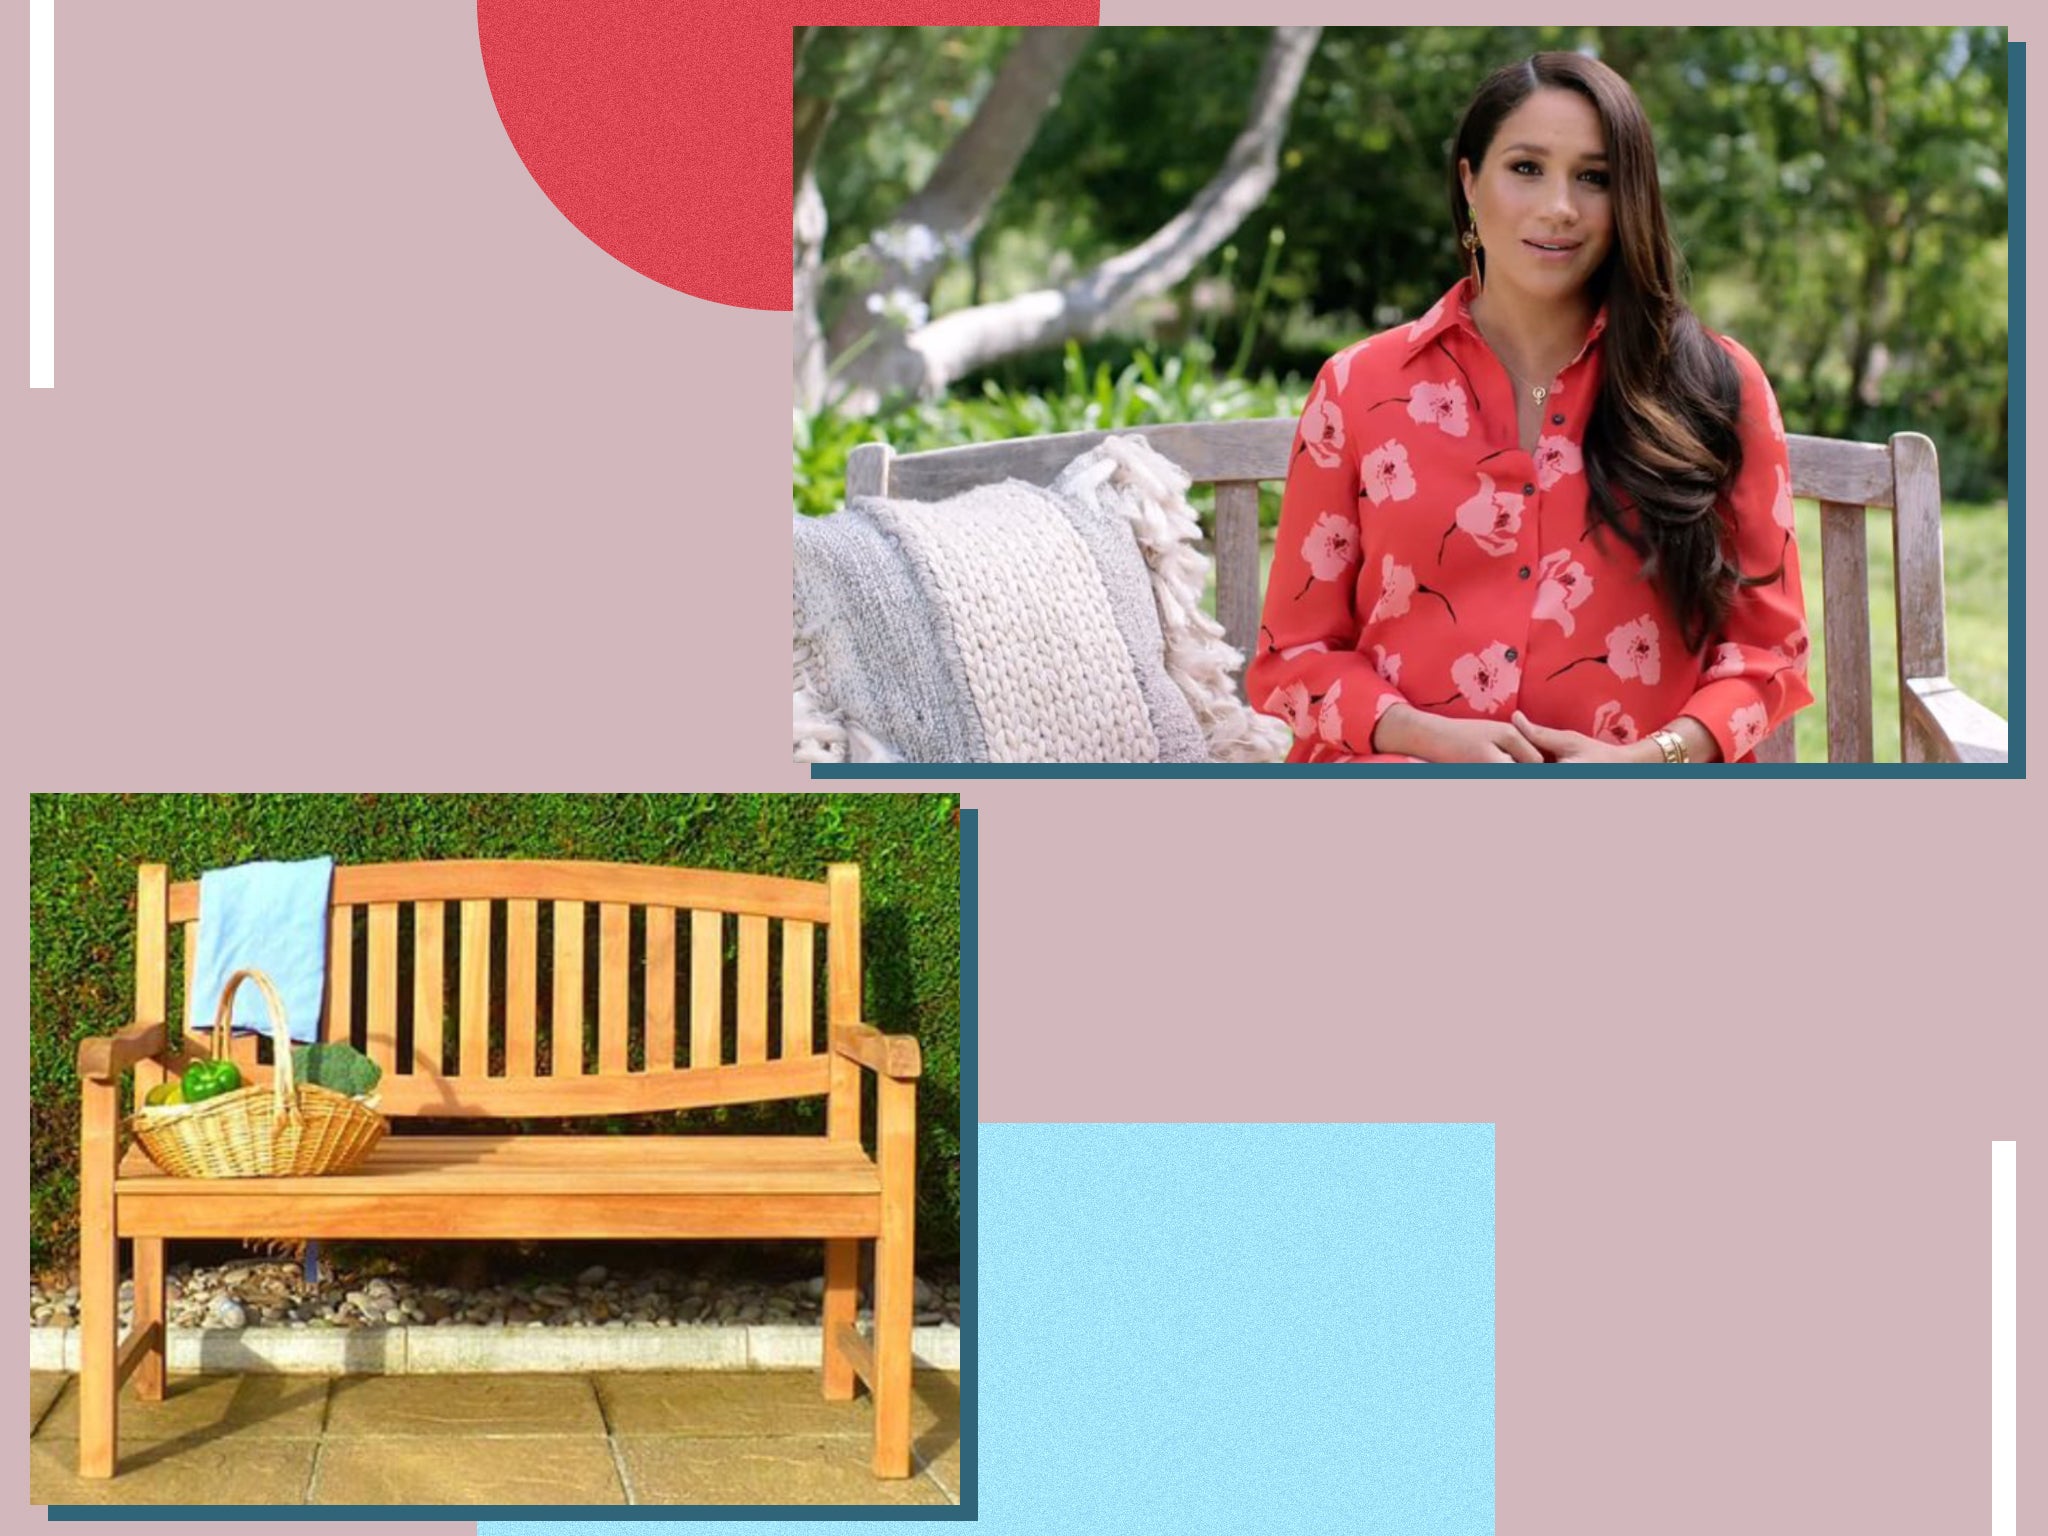 Could it be the titular ‘bench’ of Meghan’s new children’s book?